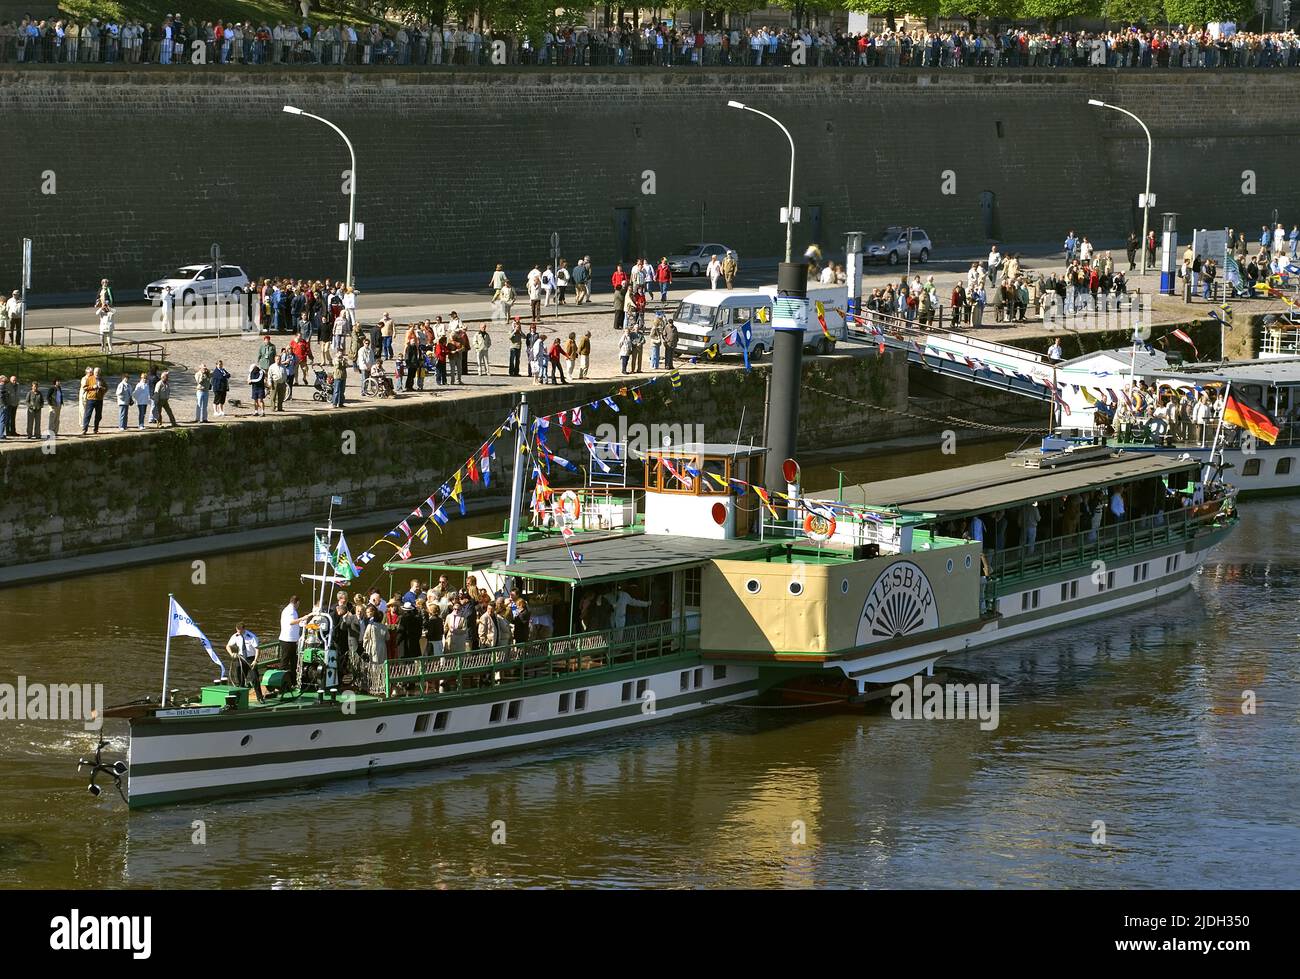 Steam ship during the famous annual steam ship parade on the Elbe River near the old town of Dresden, Germany, Saxony, Dresden Stock Photo